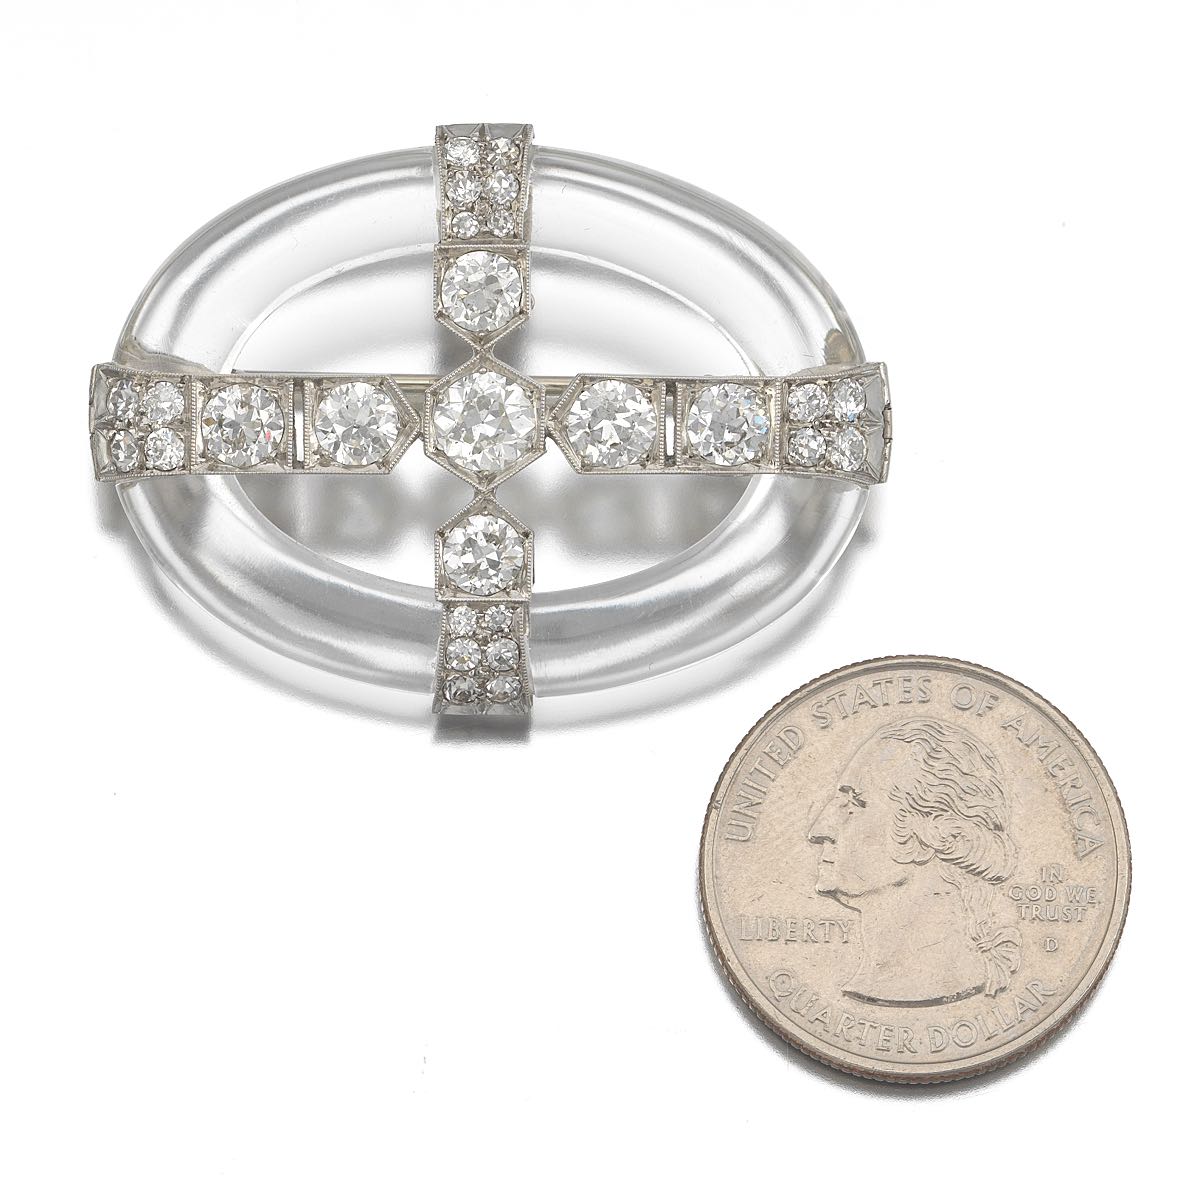 Diamond, Platinum and Rock Crystal Brooch  1-3/4 x 1-1/8 in. Oval shape brooch comprised of carved - Image 3 of 4